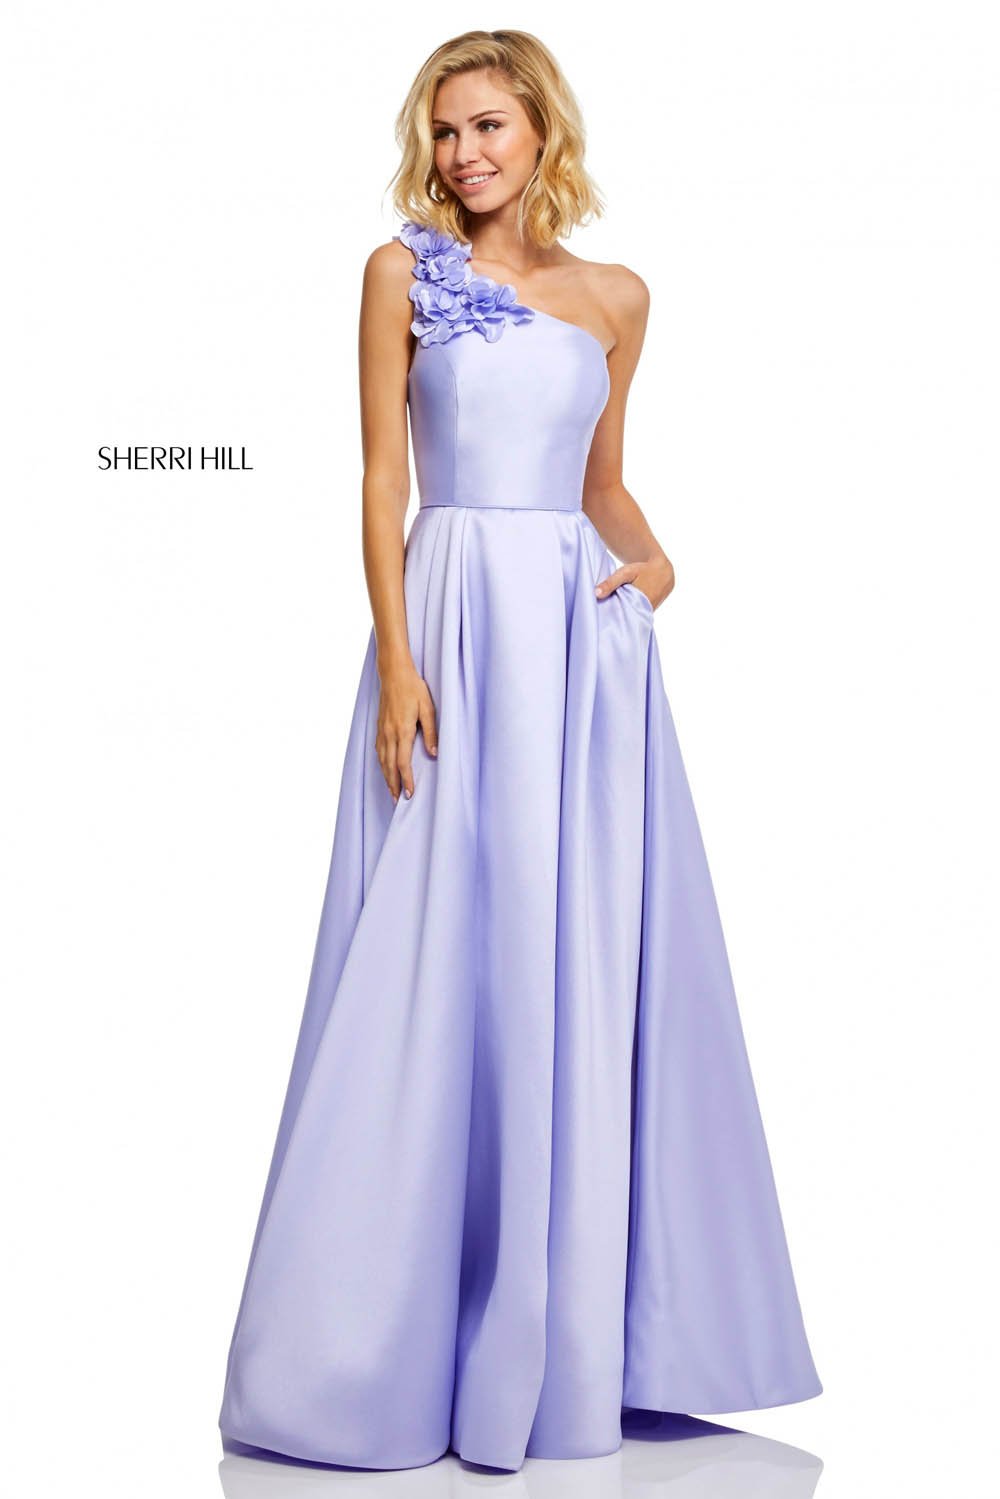 Sherri Hill 52720 dress images in these colors: Candy Pink, Yellow, Red, Lilac.